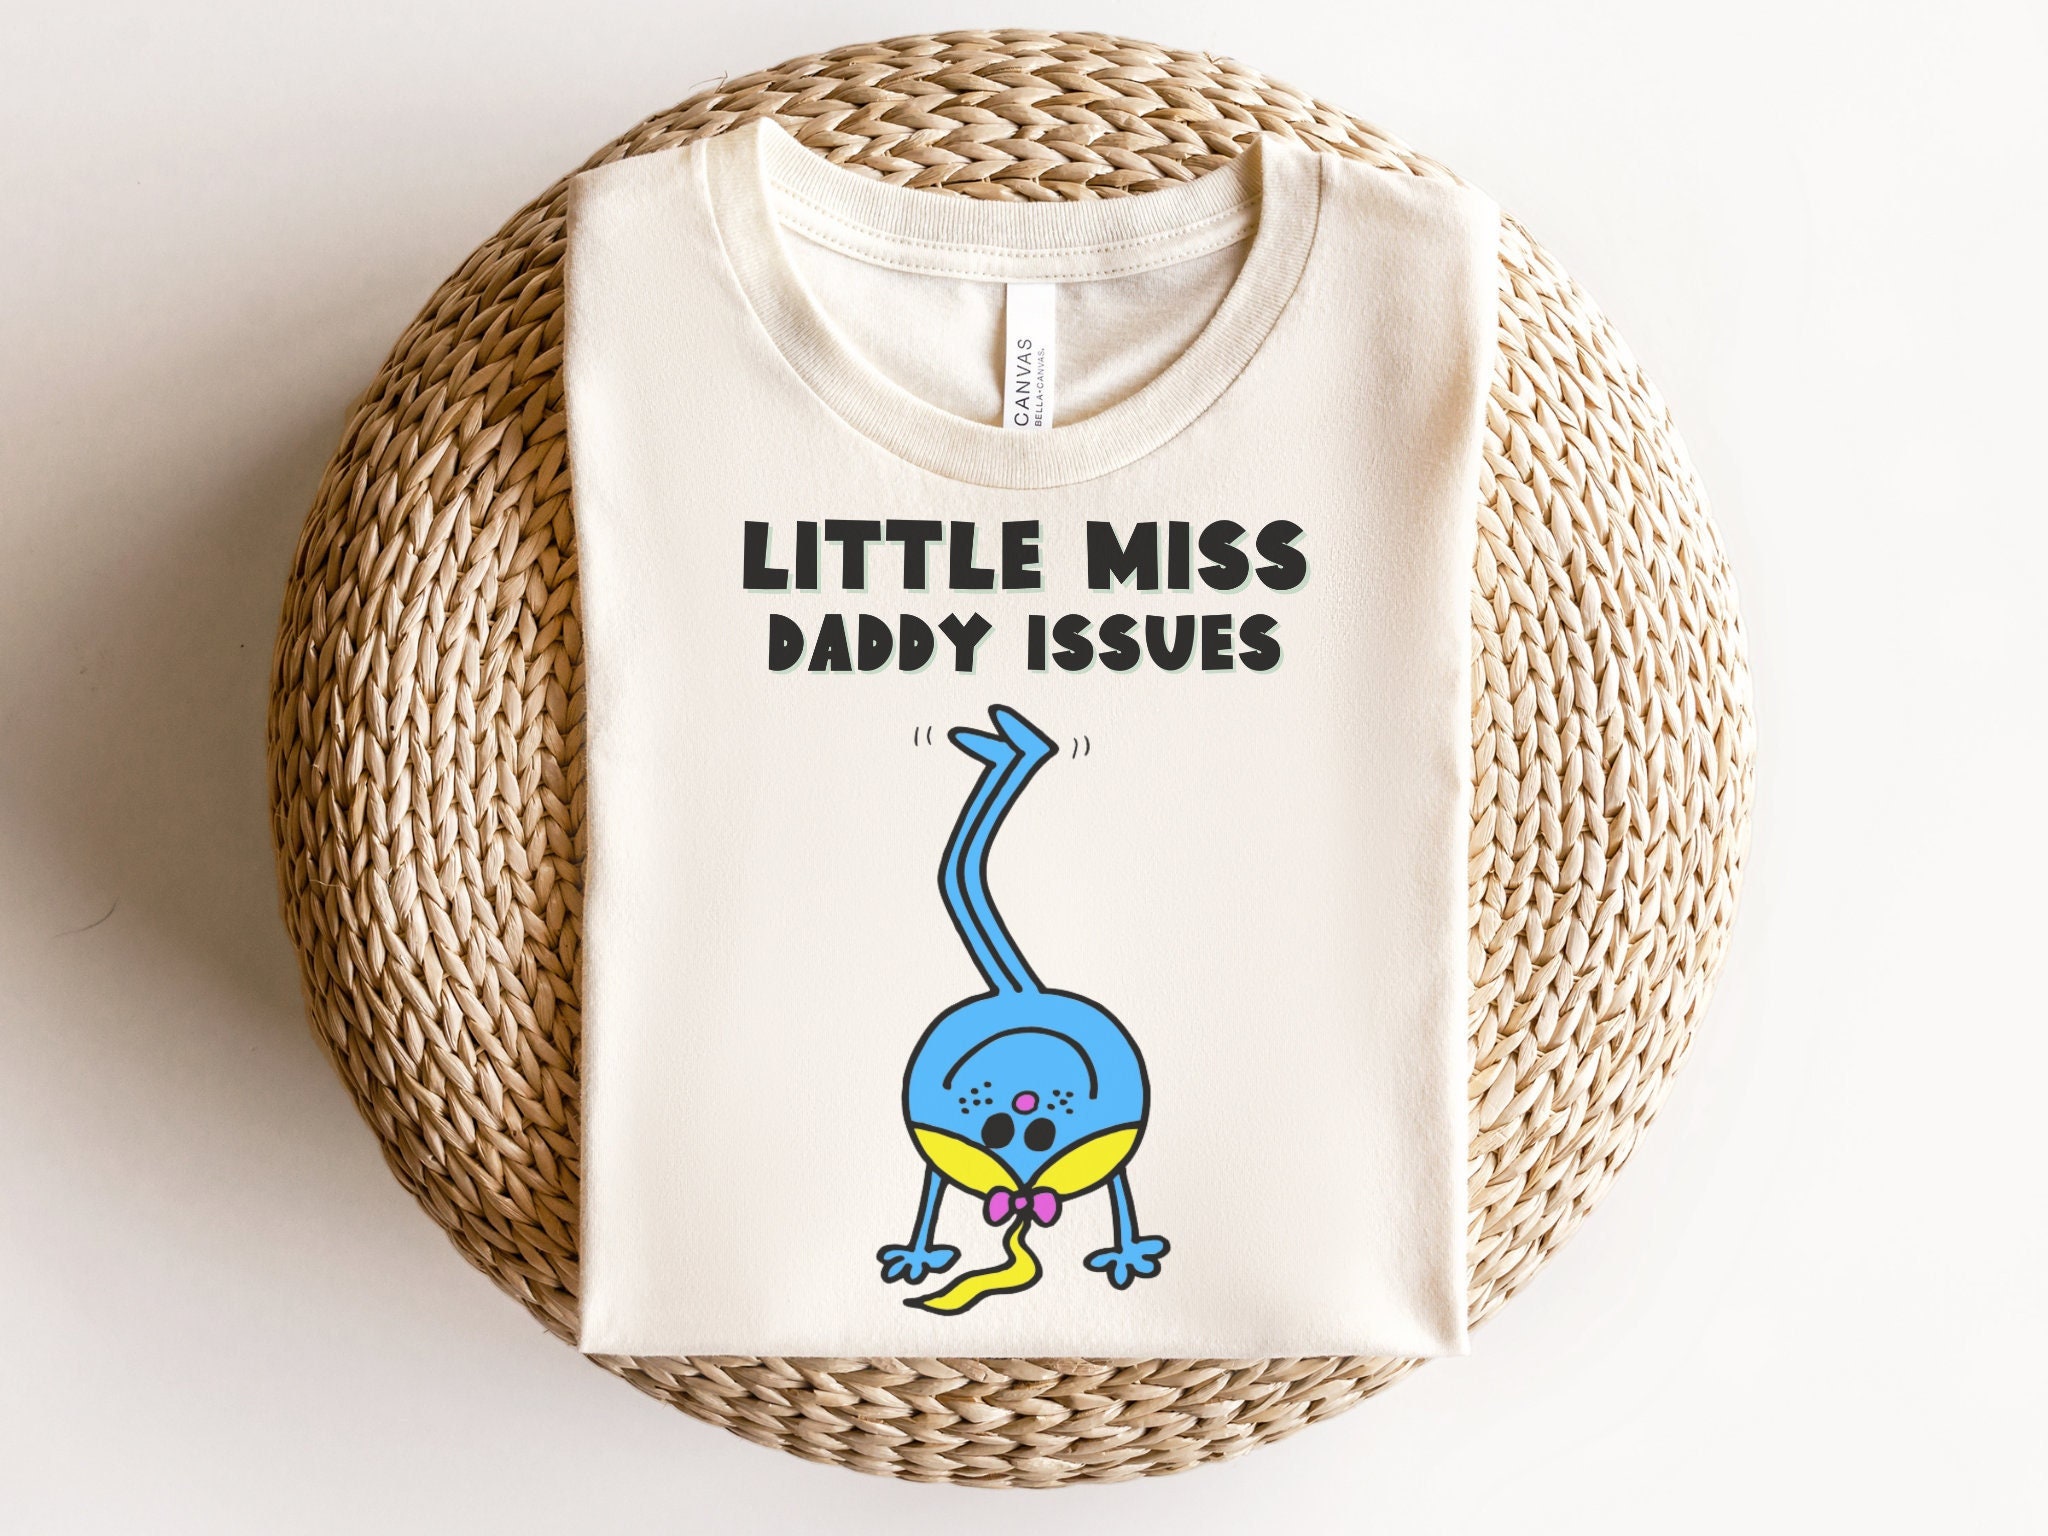 Little Miss Perfect Etsy